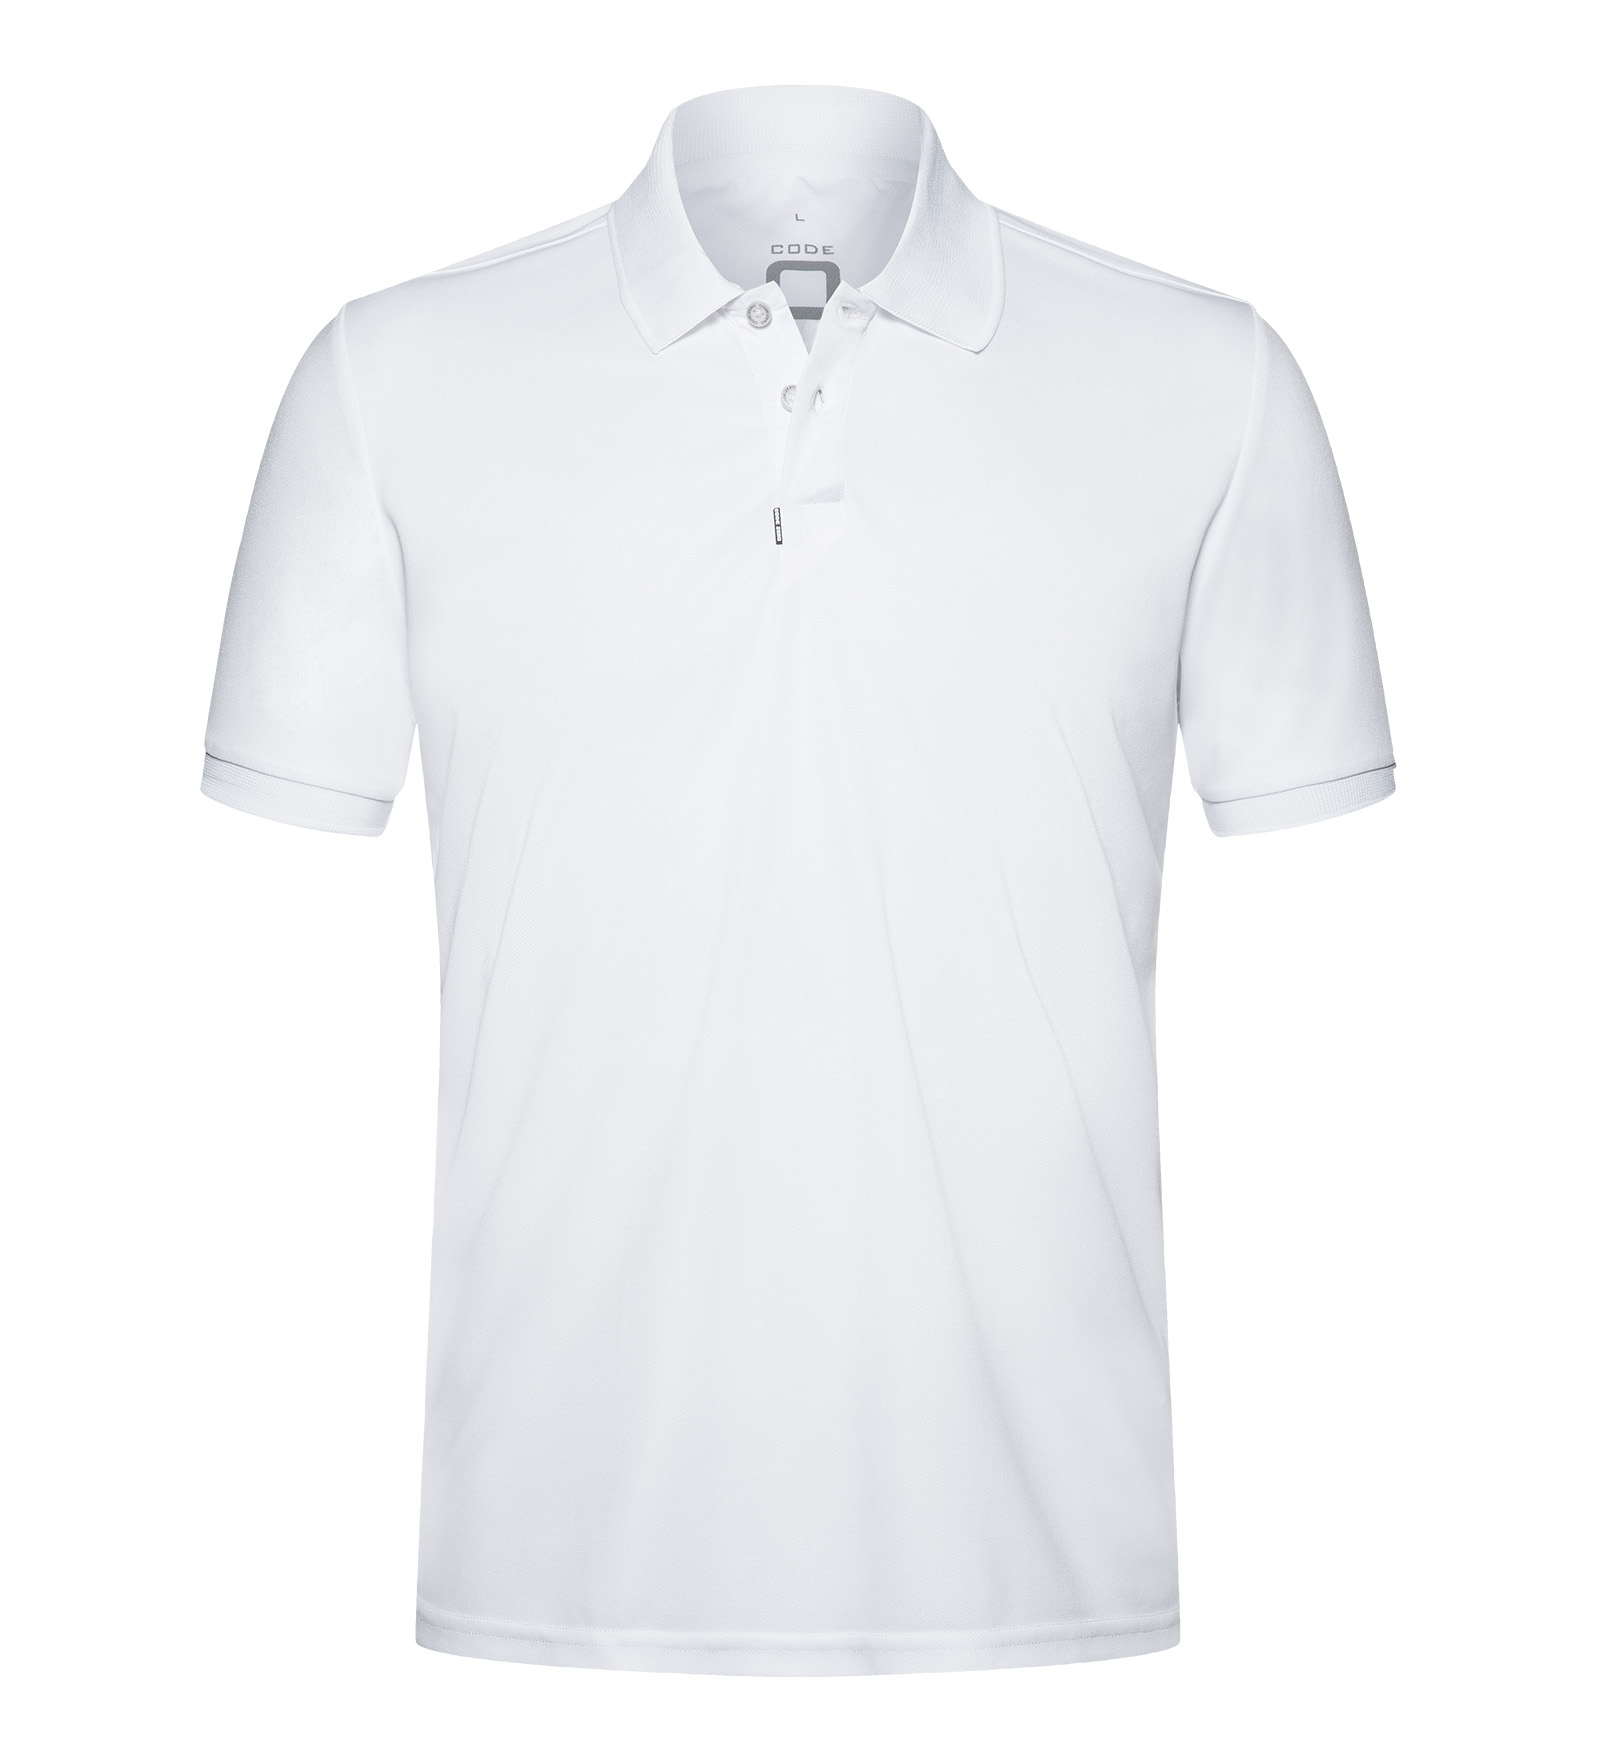 FengShengZX Gm?C Mens Polo Shirts Quick-Drying Comfort for Outdoor Sports 